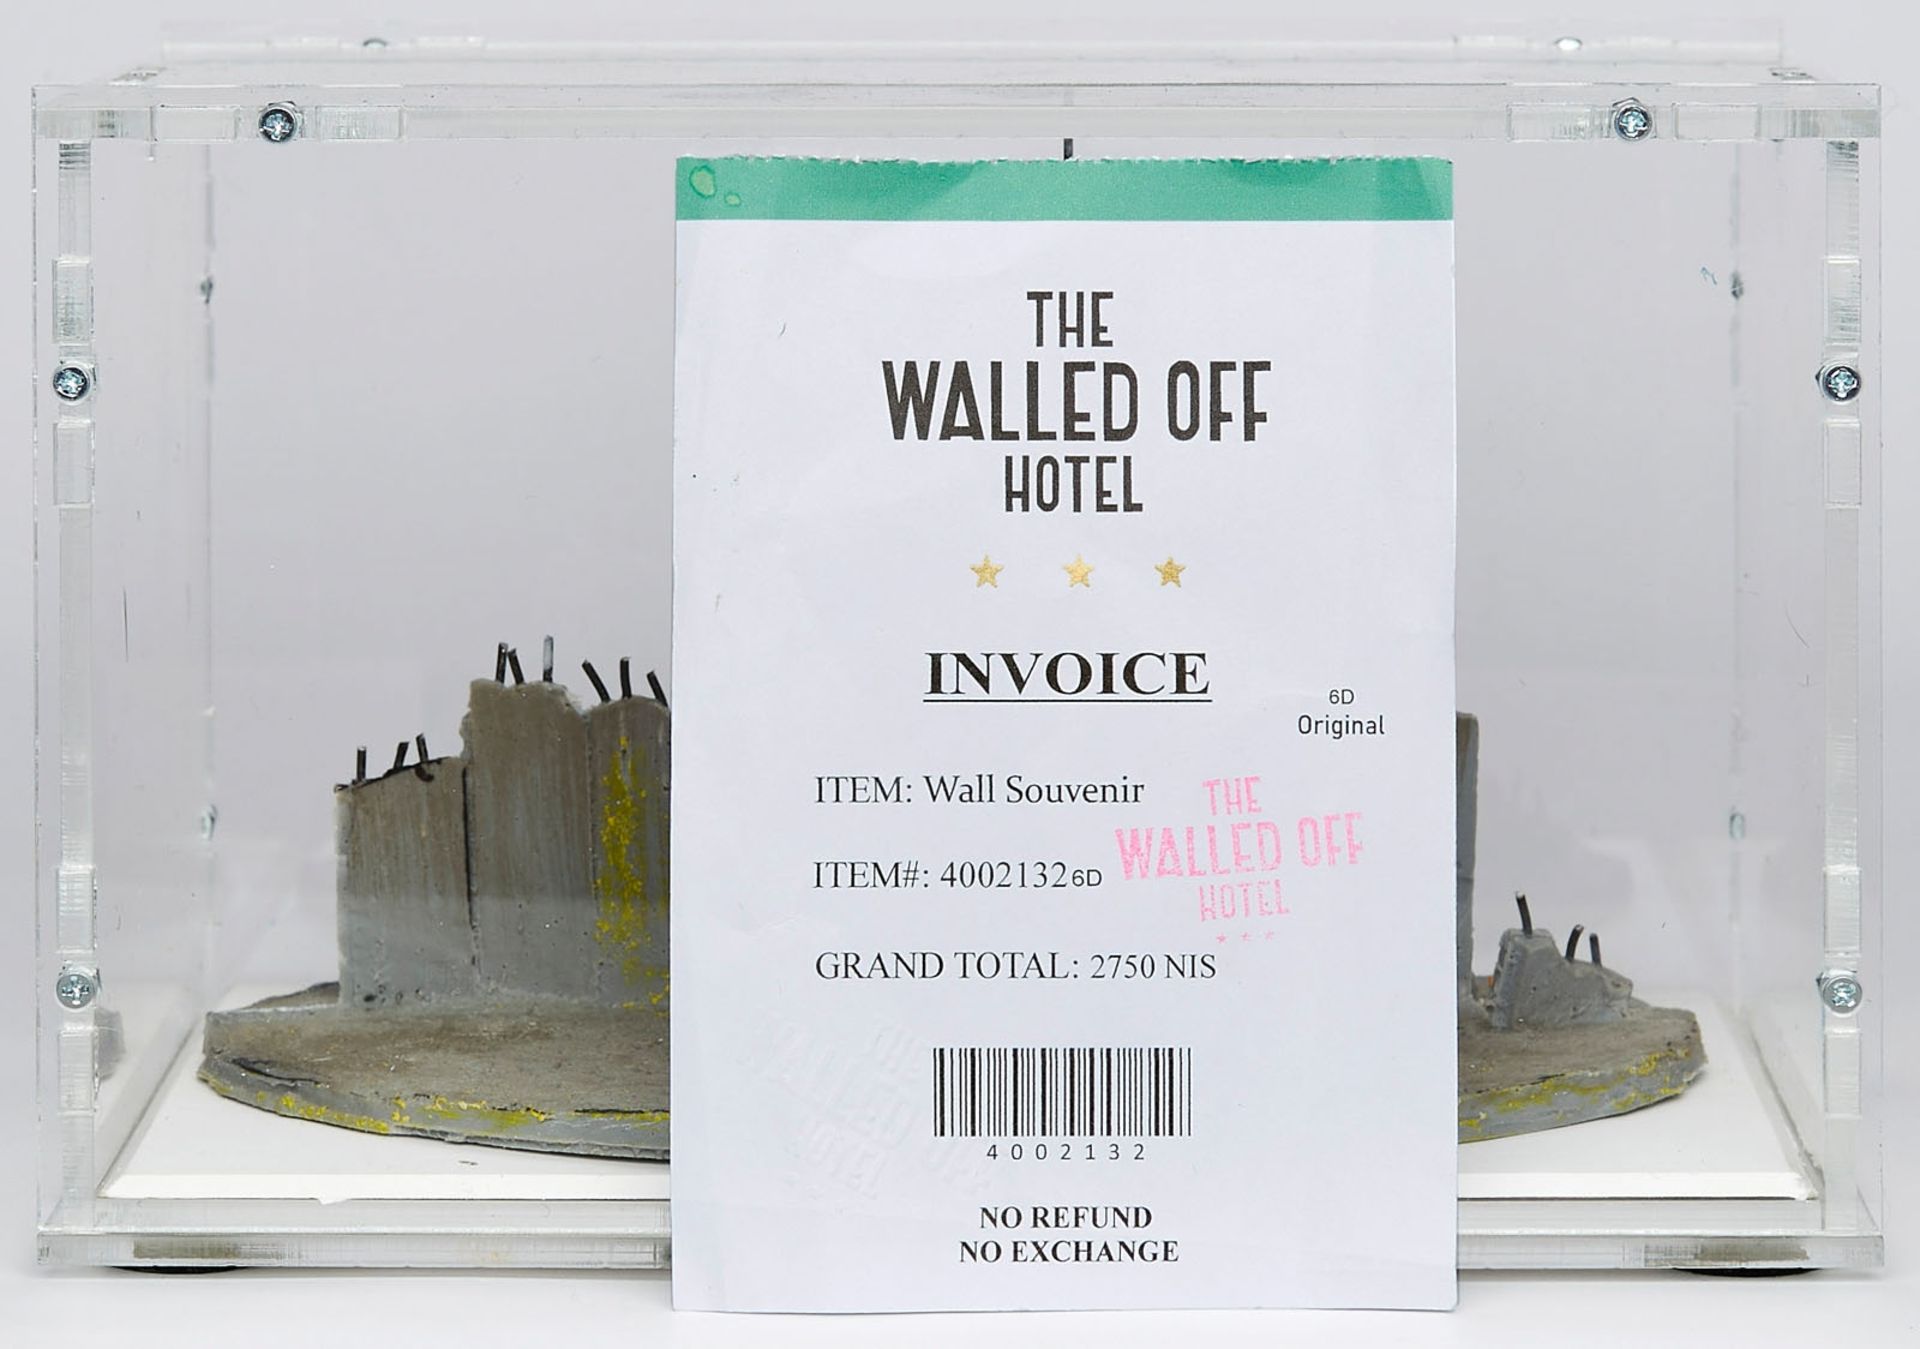 Objekt Banksy "The Walled off Hotel"-Souvenir, 2017. - Image 3 of 3